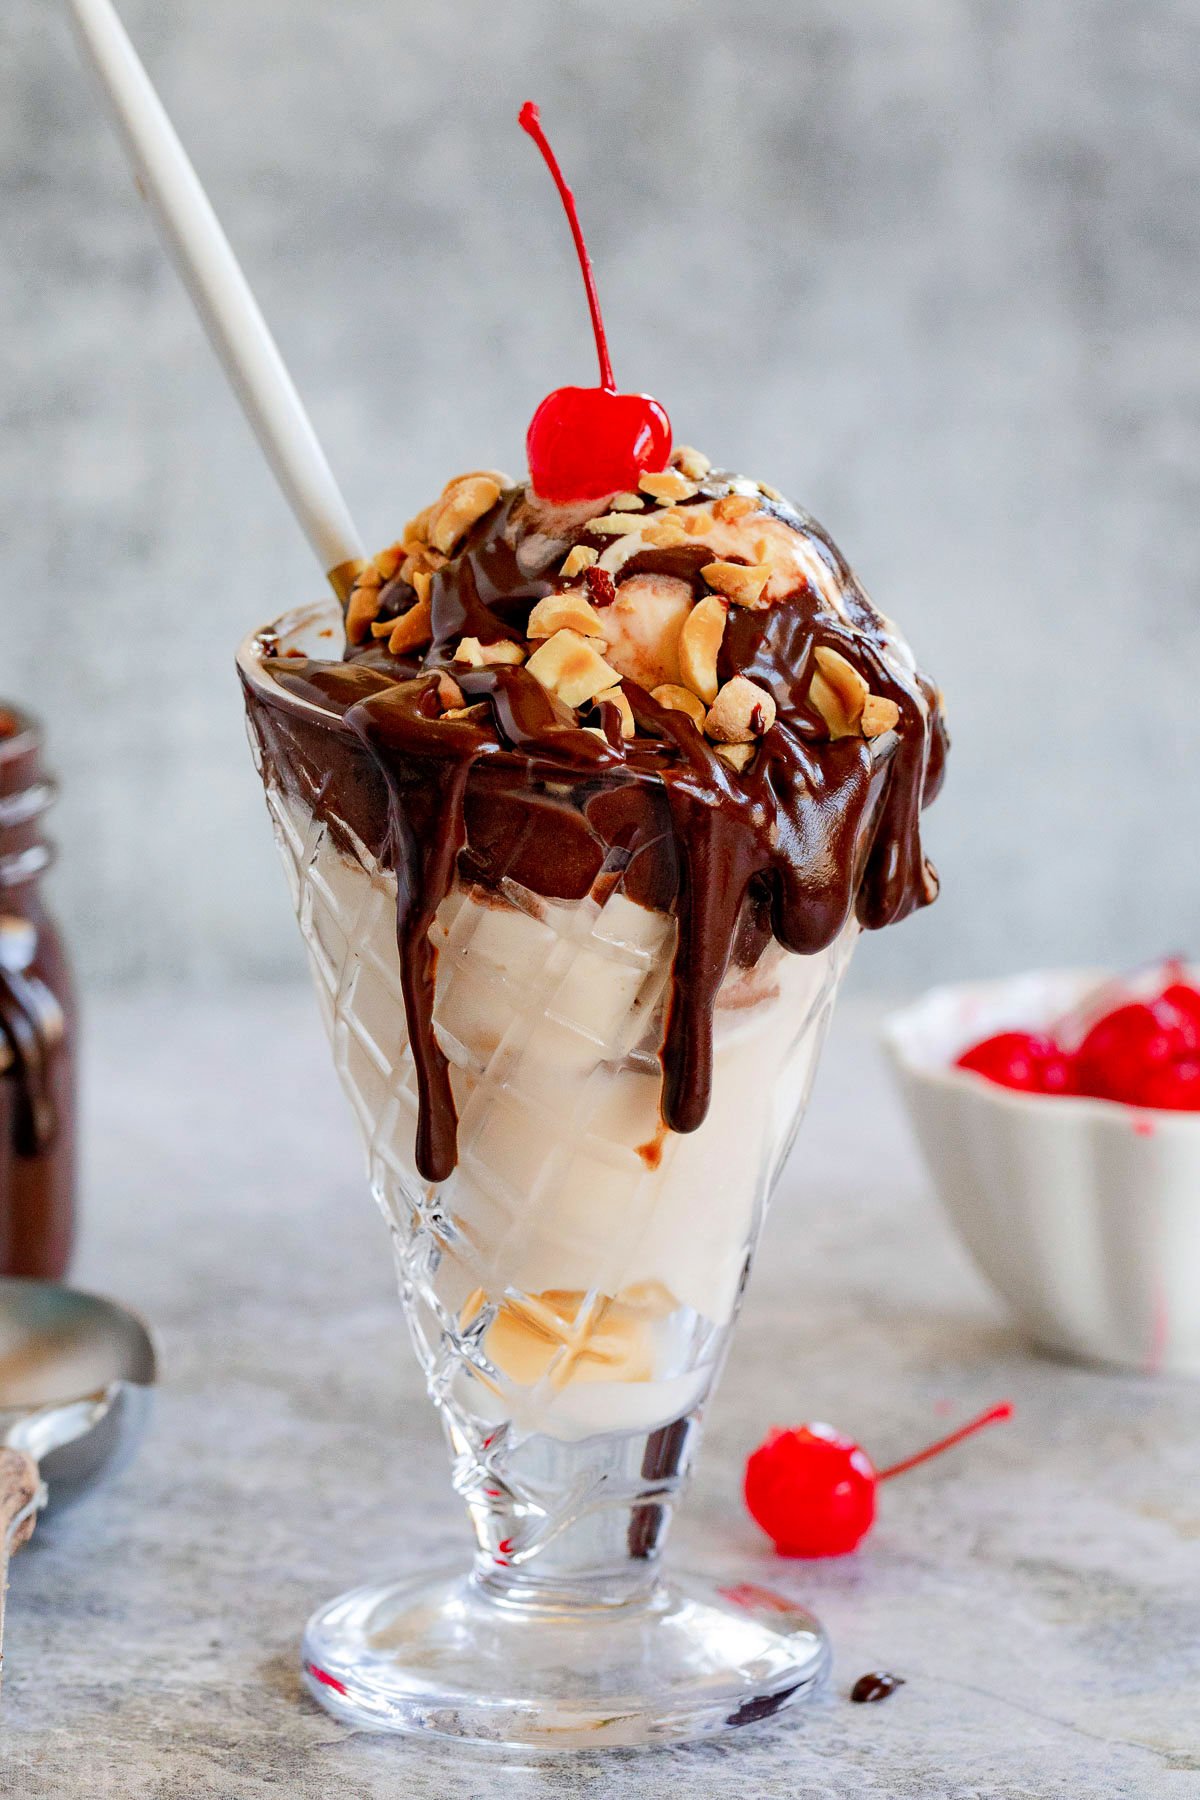 hot fudge sundae made with homemade hot fudge sauce, peanuts and a cherry on top. Served in glass cone with a white spoon.